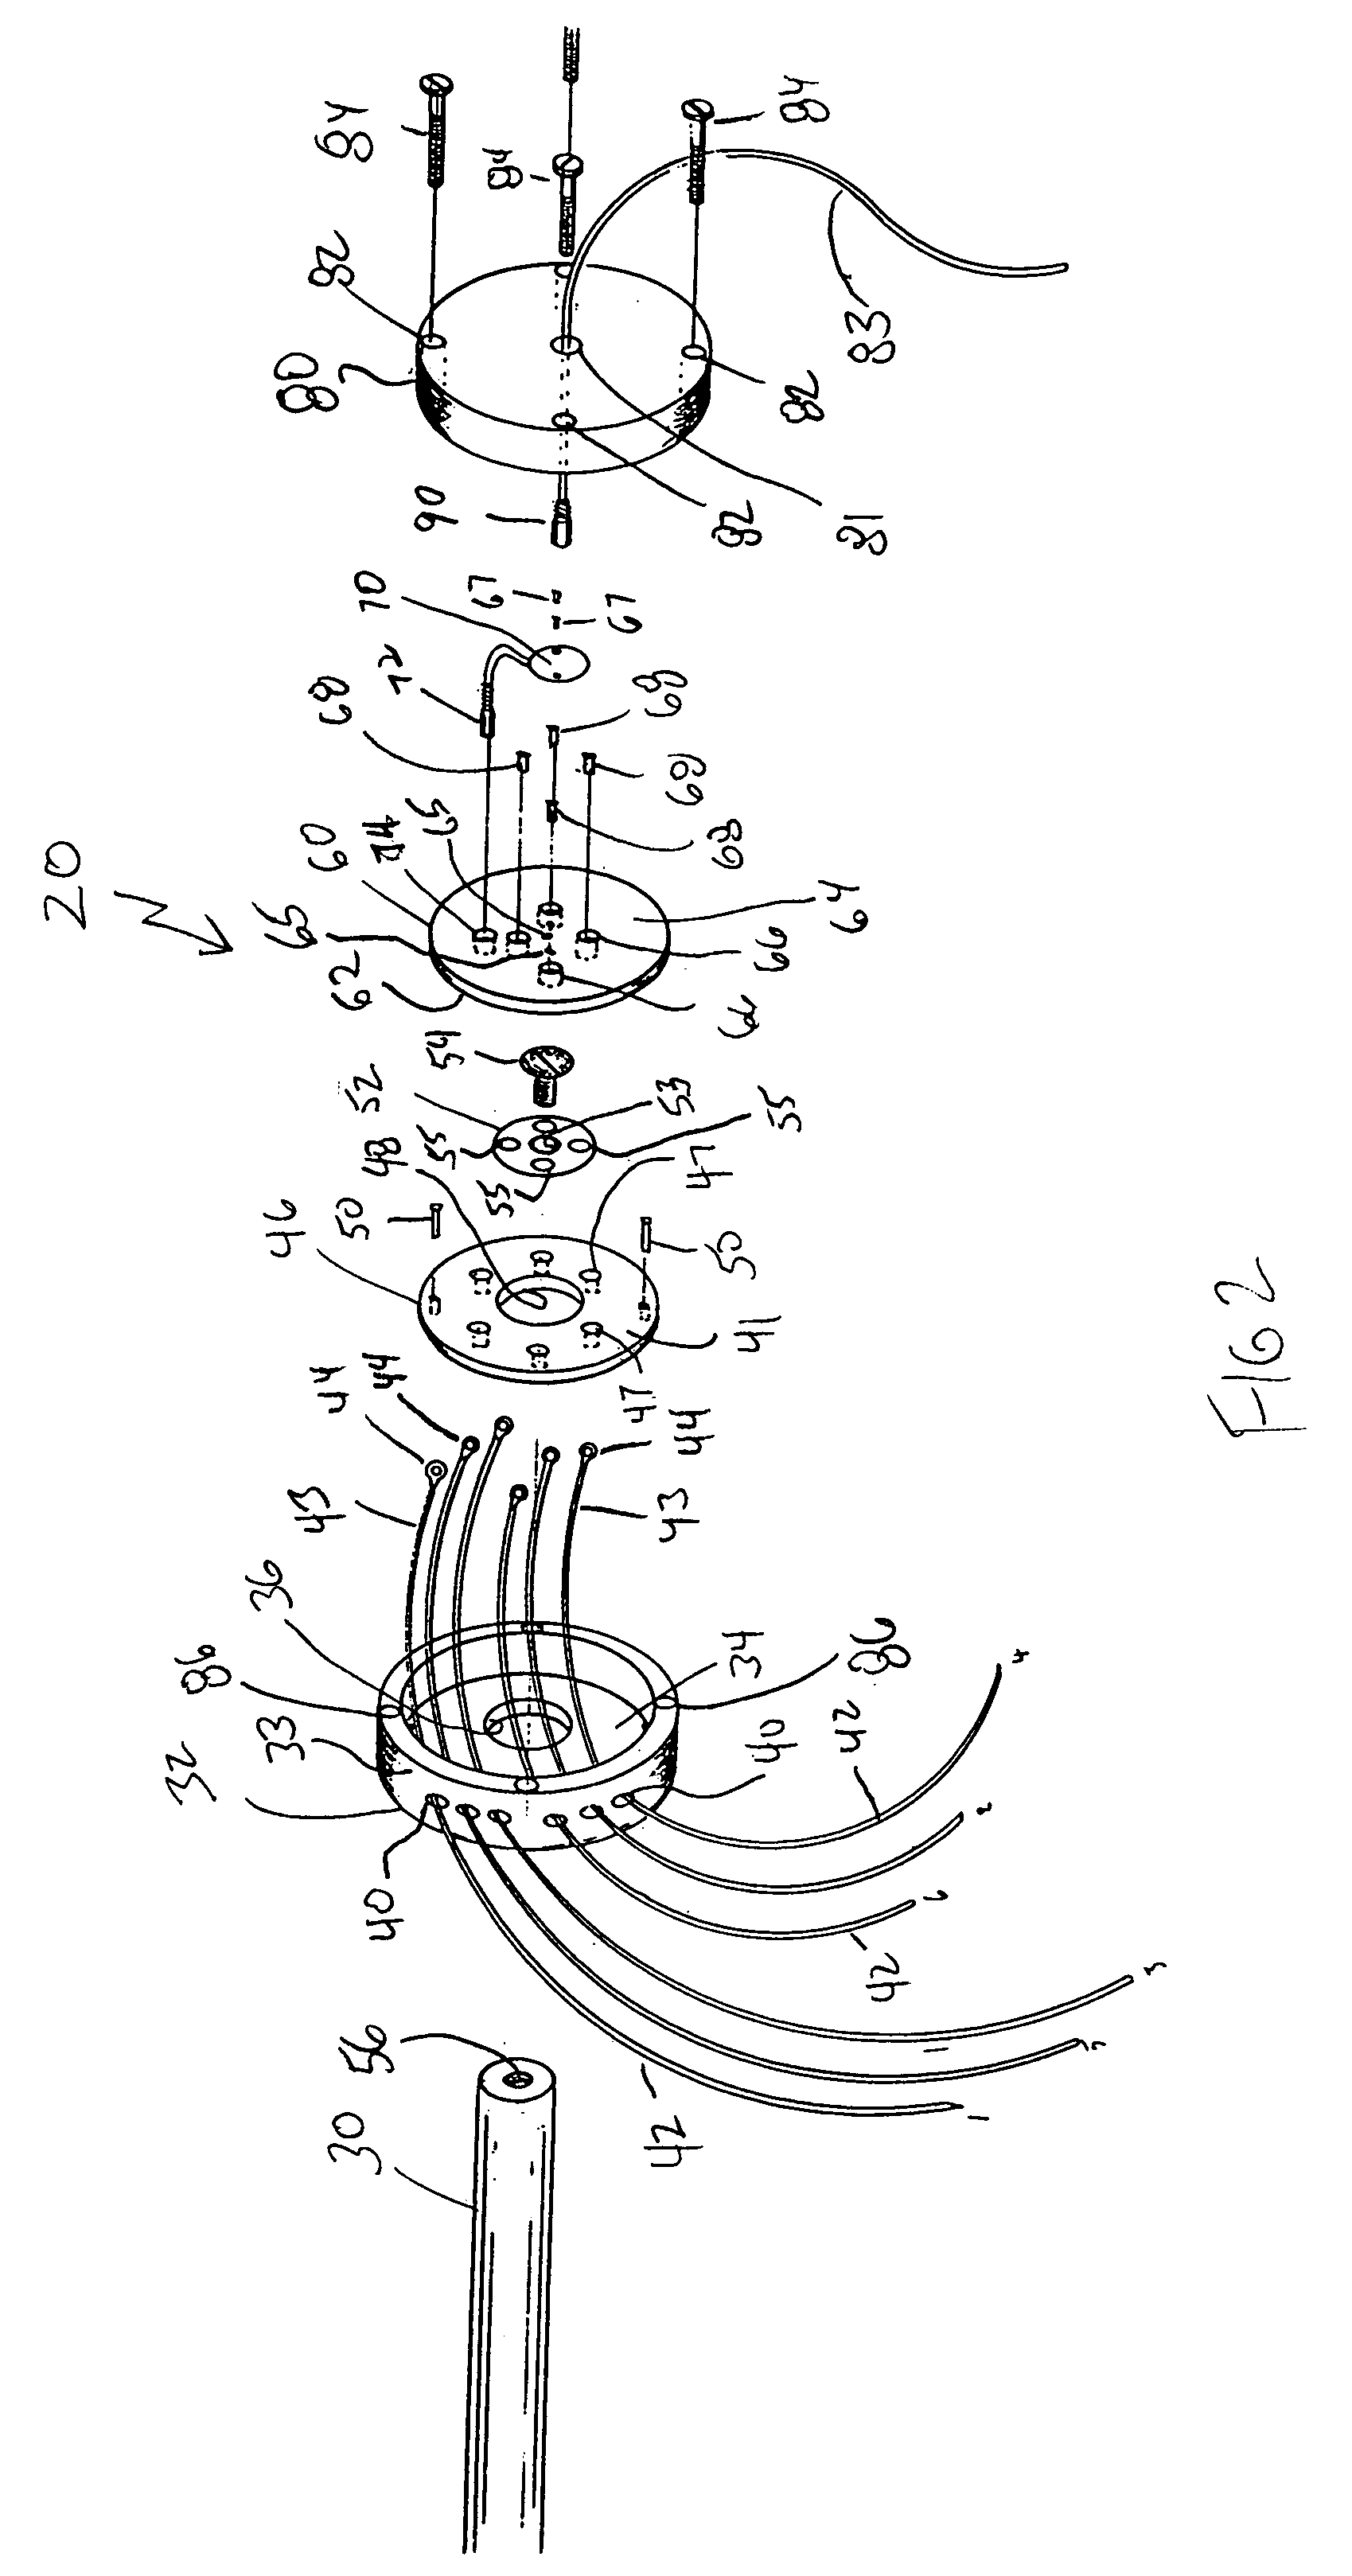 Sequential injection lubrication system for a spherical rotary valve internal combustion engine operating on natural gas or alternative fuels